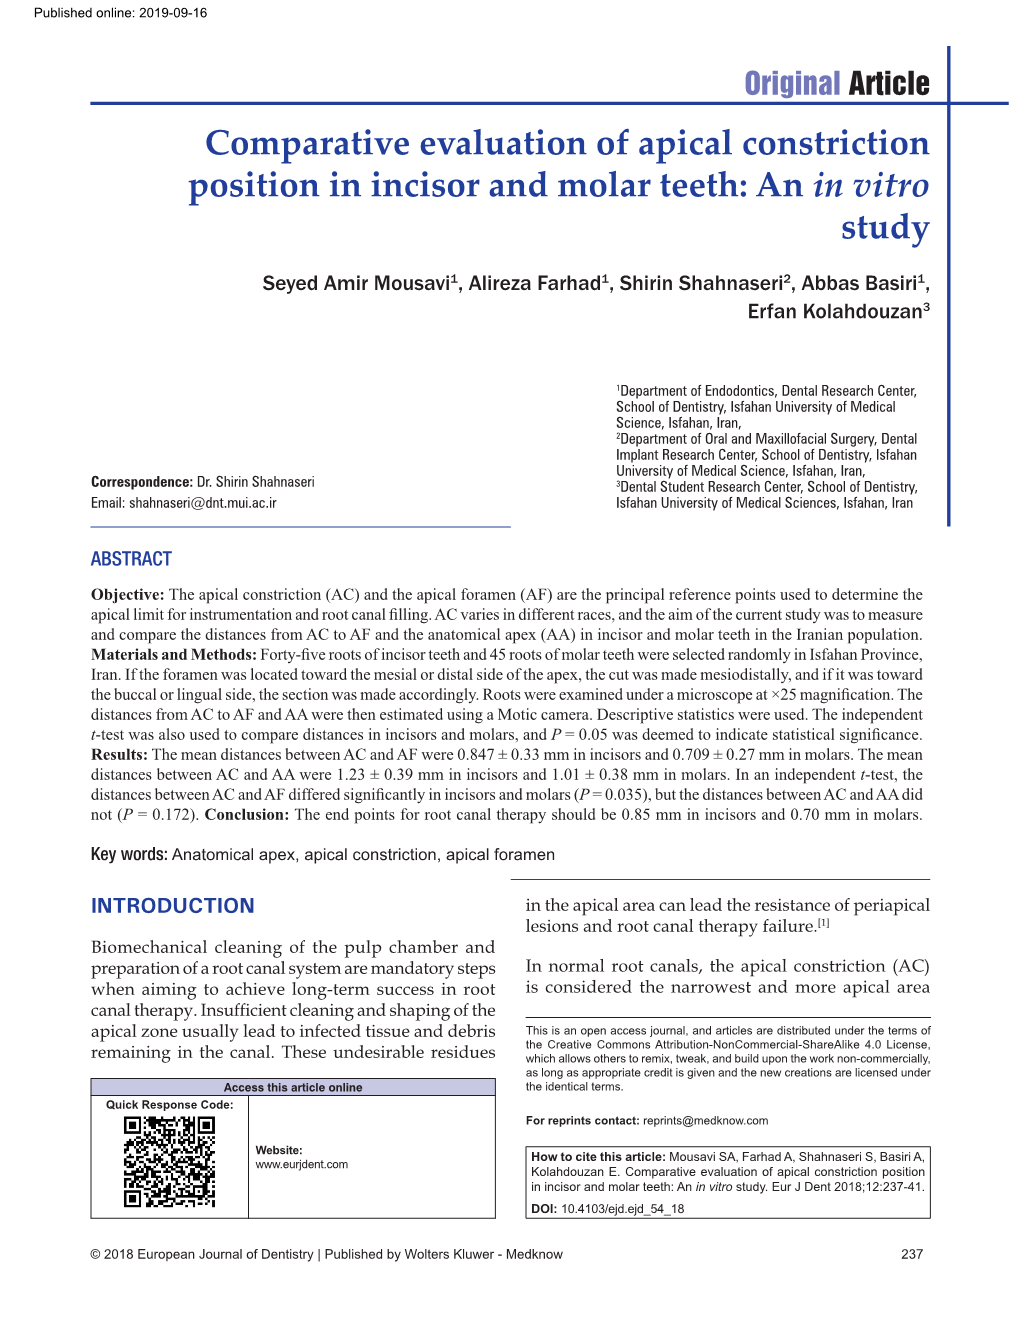 Comparative Evaluation of Apical Constriction Position in Incisor and Molar Teeth: an in Vitro Study